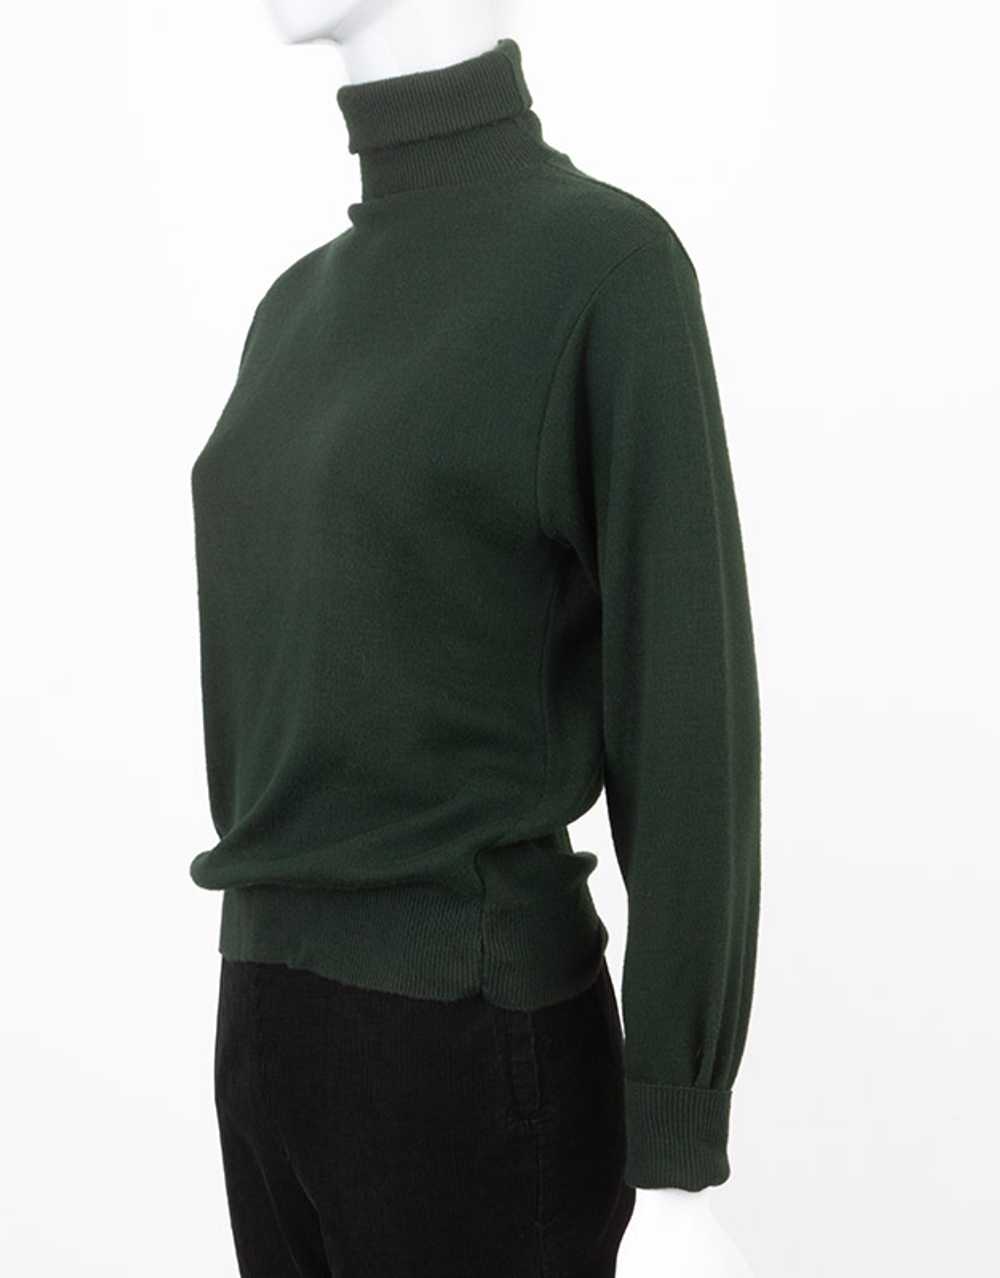 70s Jersey Knit Turtle Neck Pullover - image 2